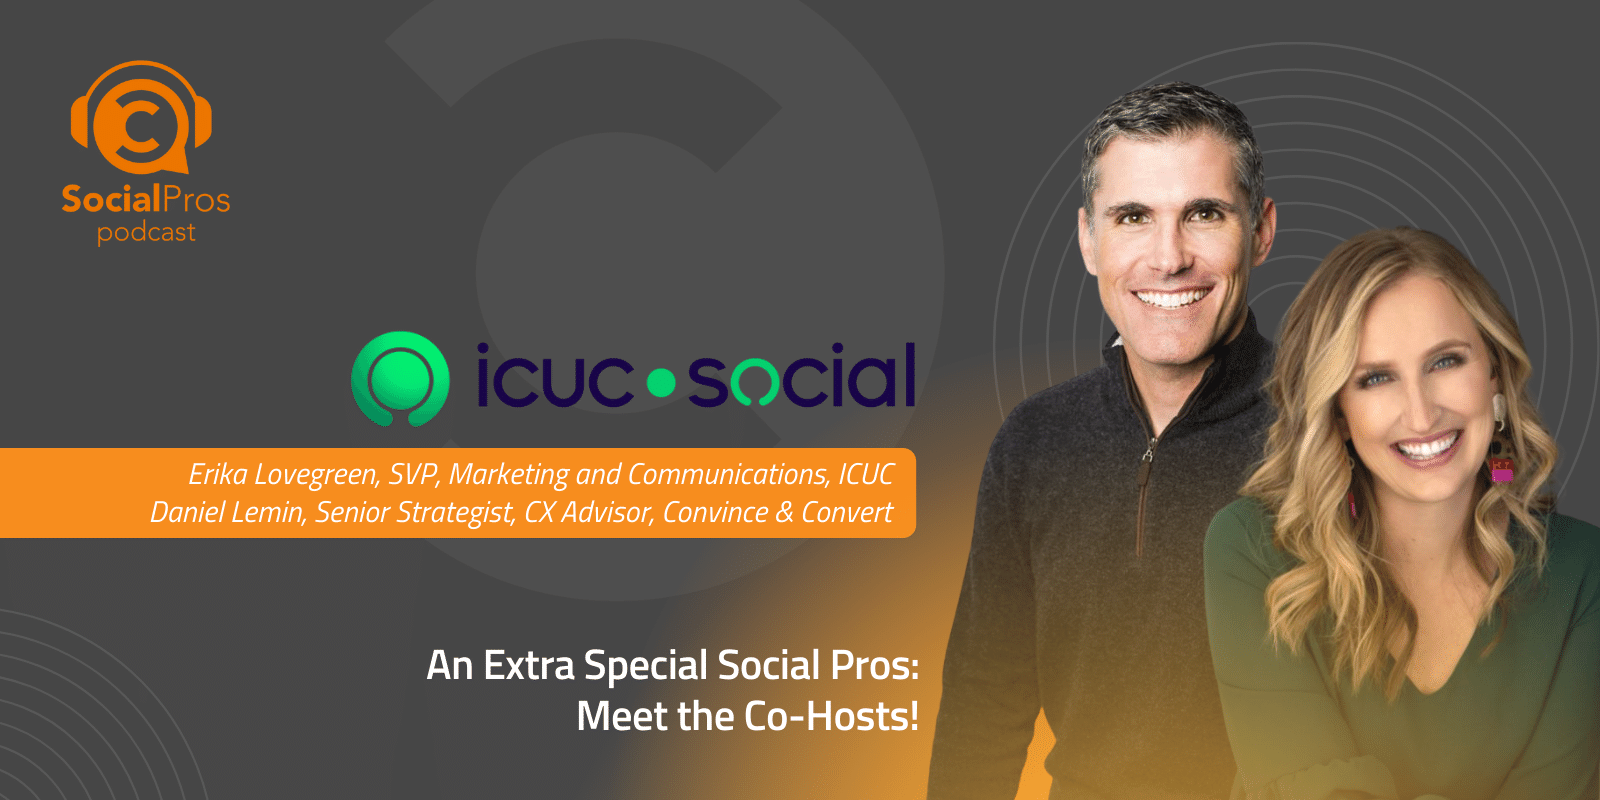 An Extra Special Social Pros: Meet the Co-Hosts!